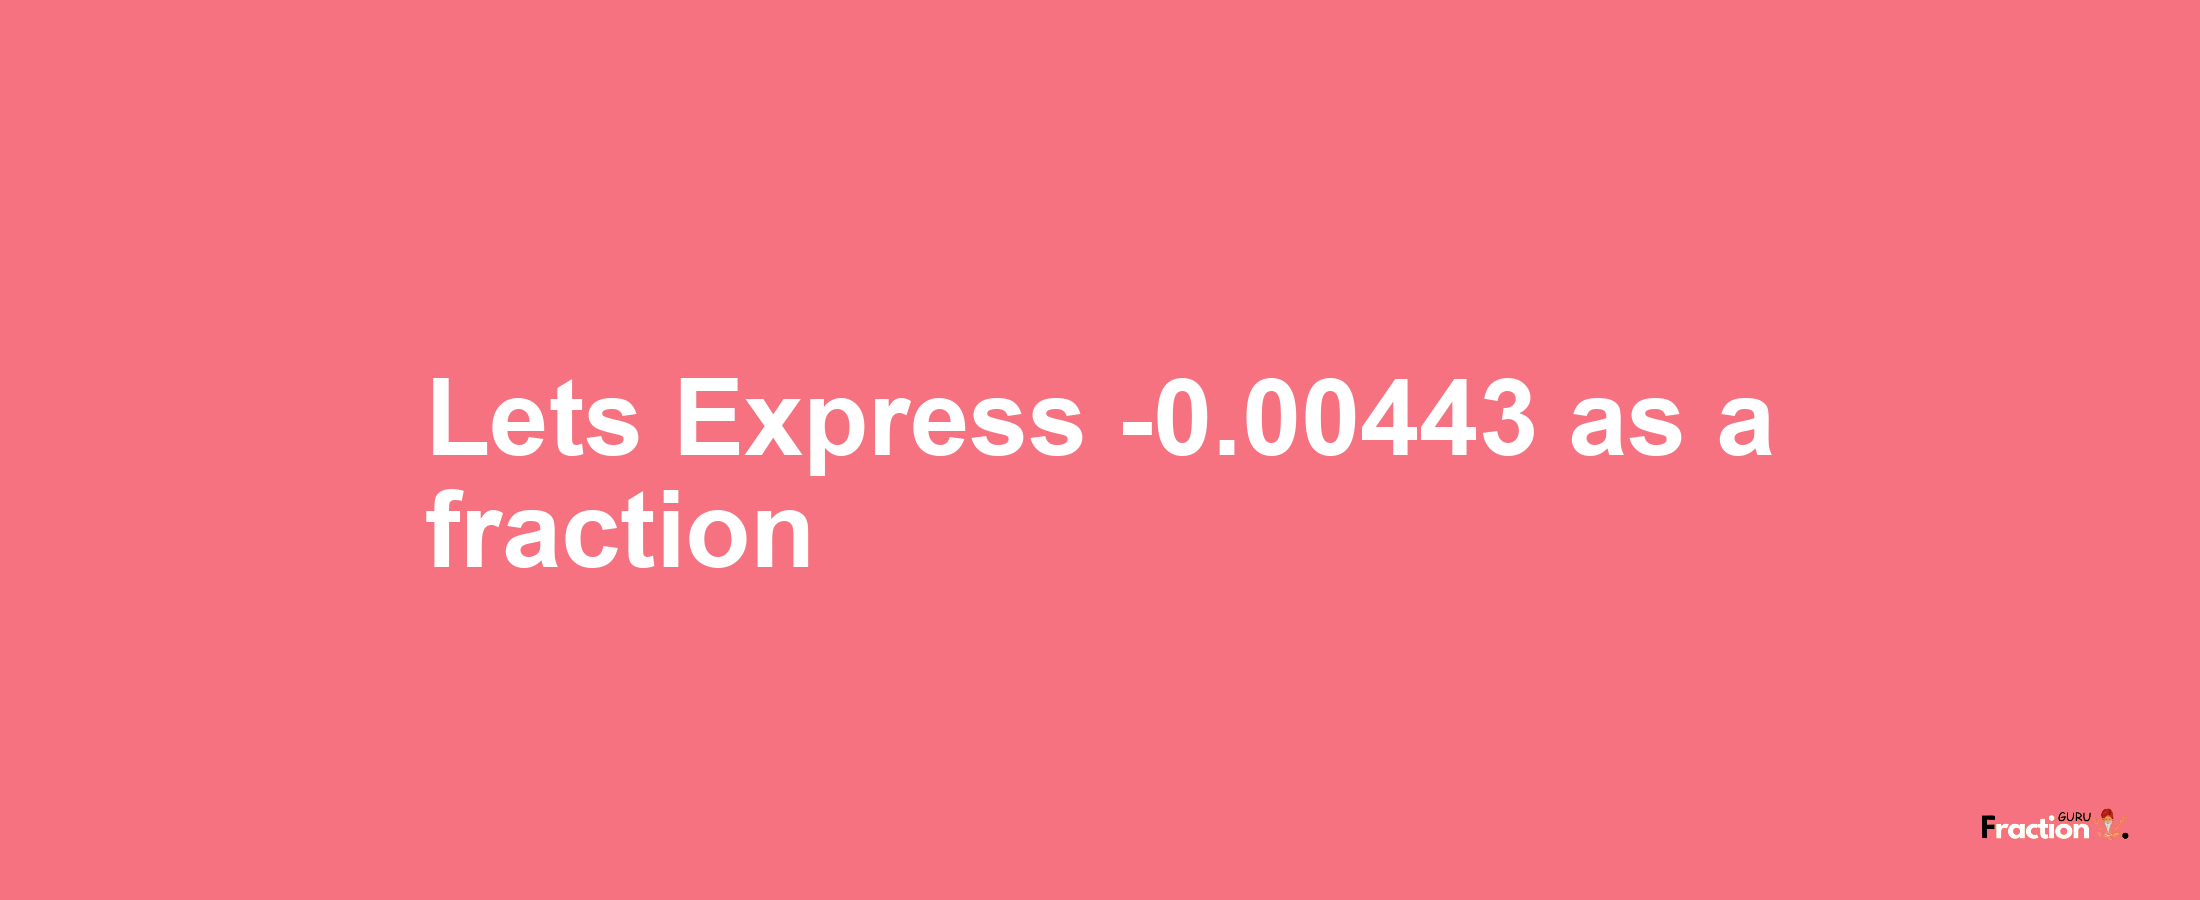 Lets Express -0.00443 as afraction